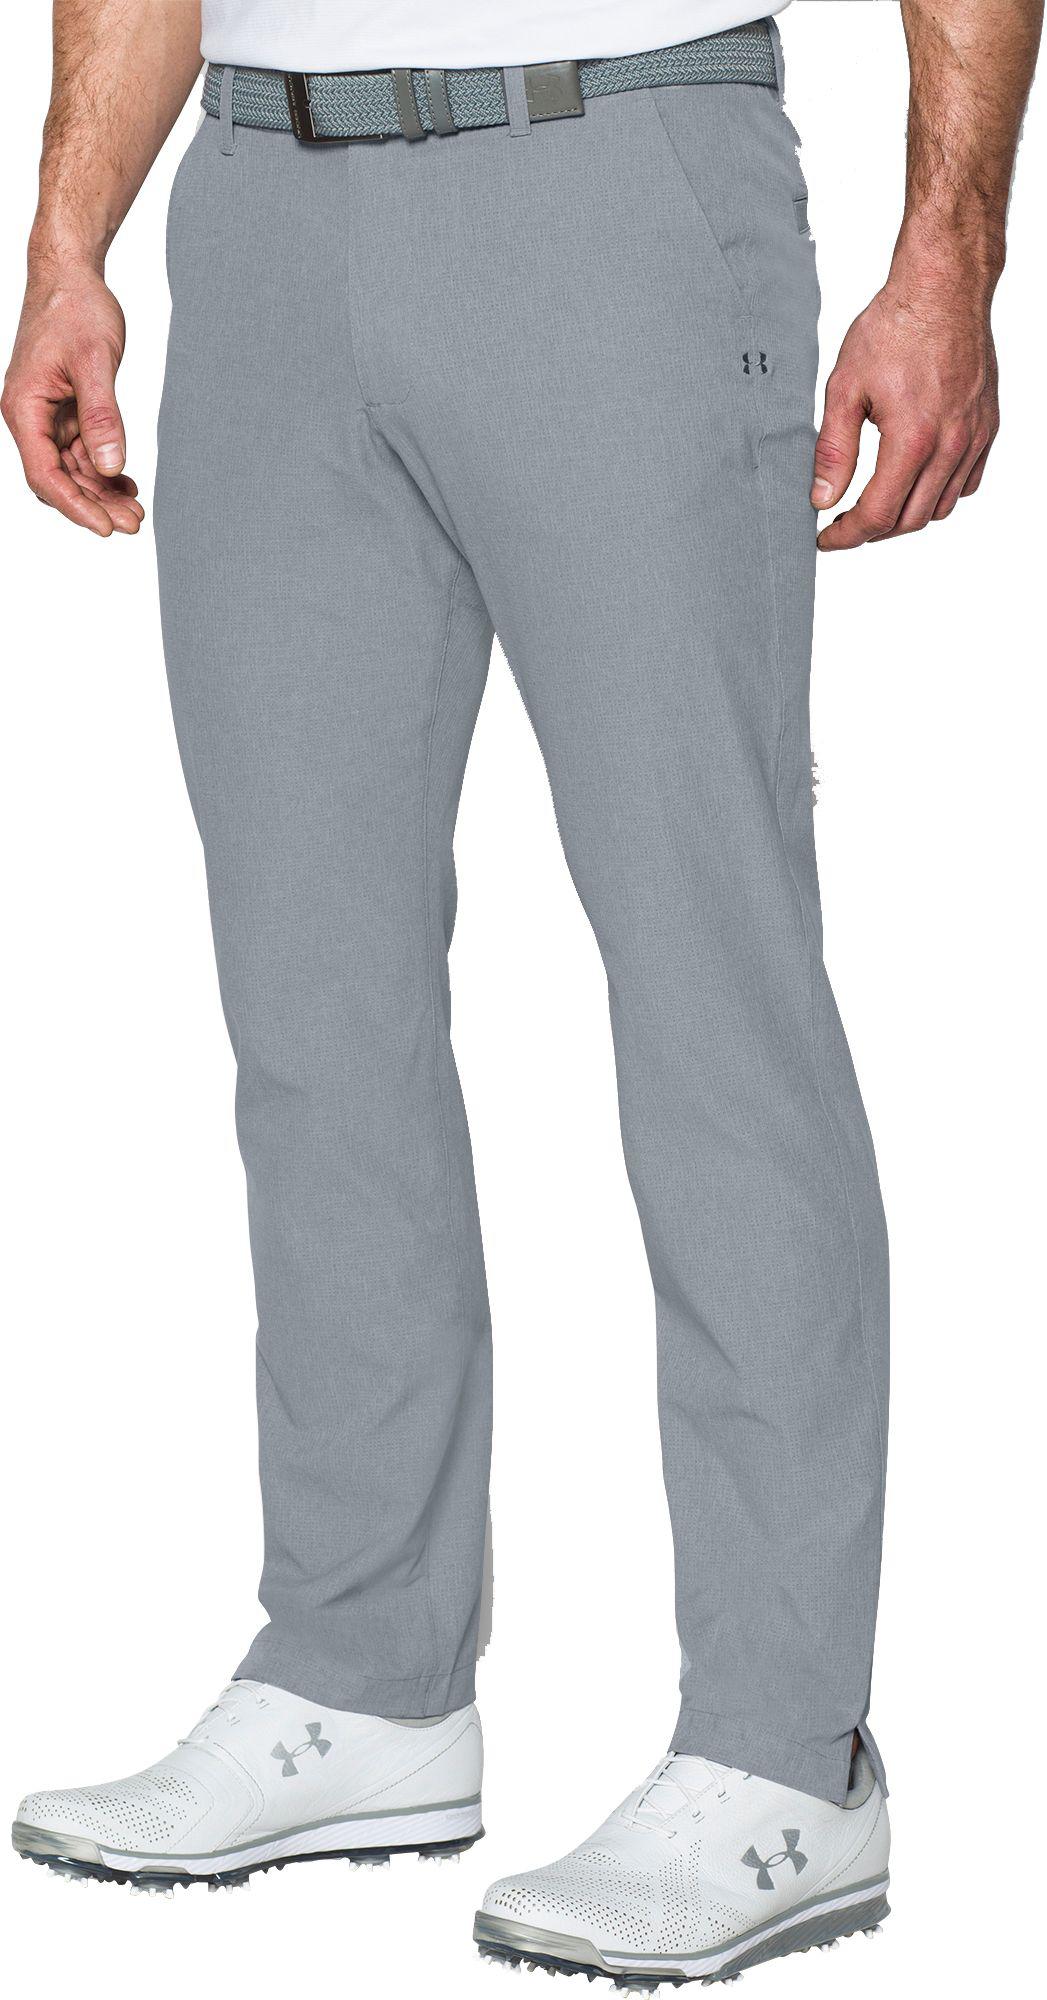 under armour match play vented pants